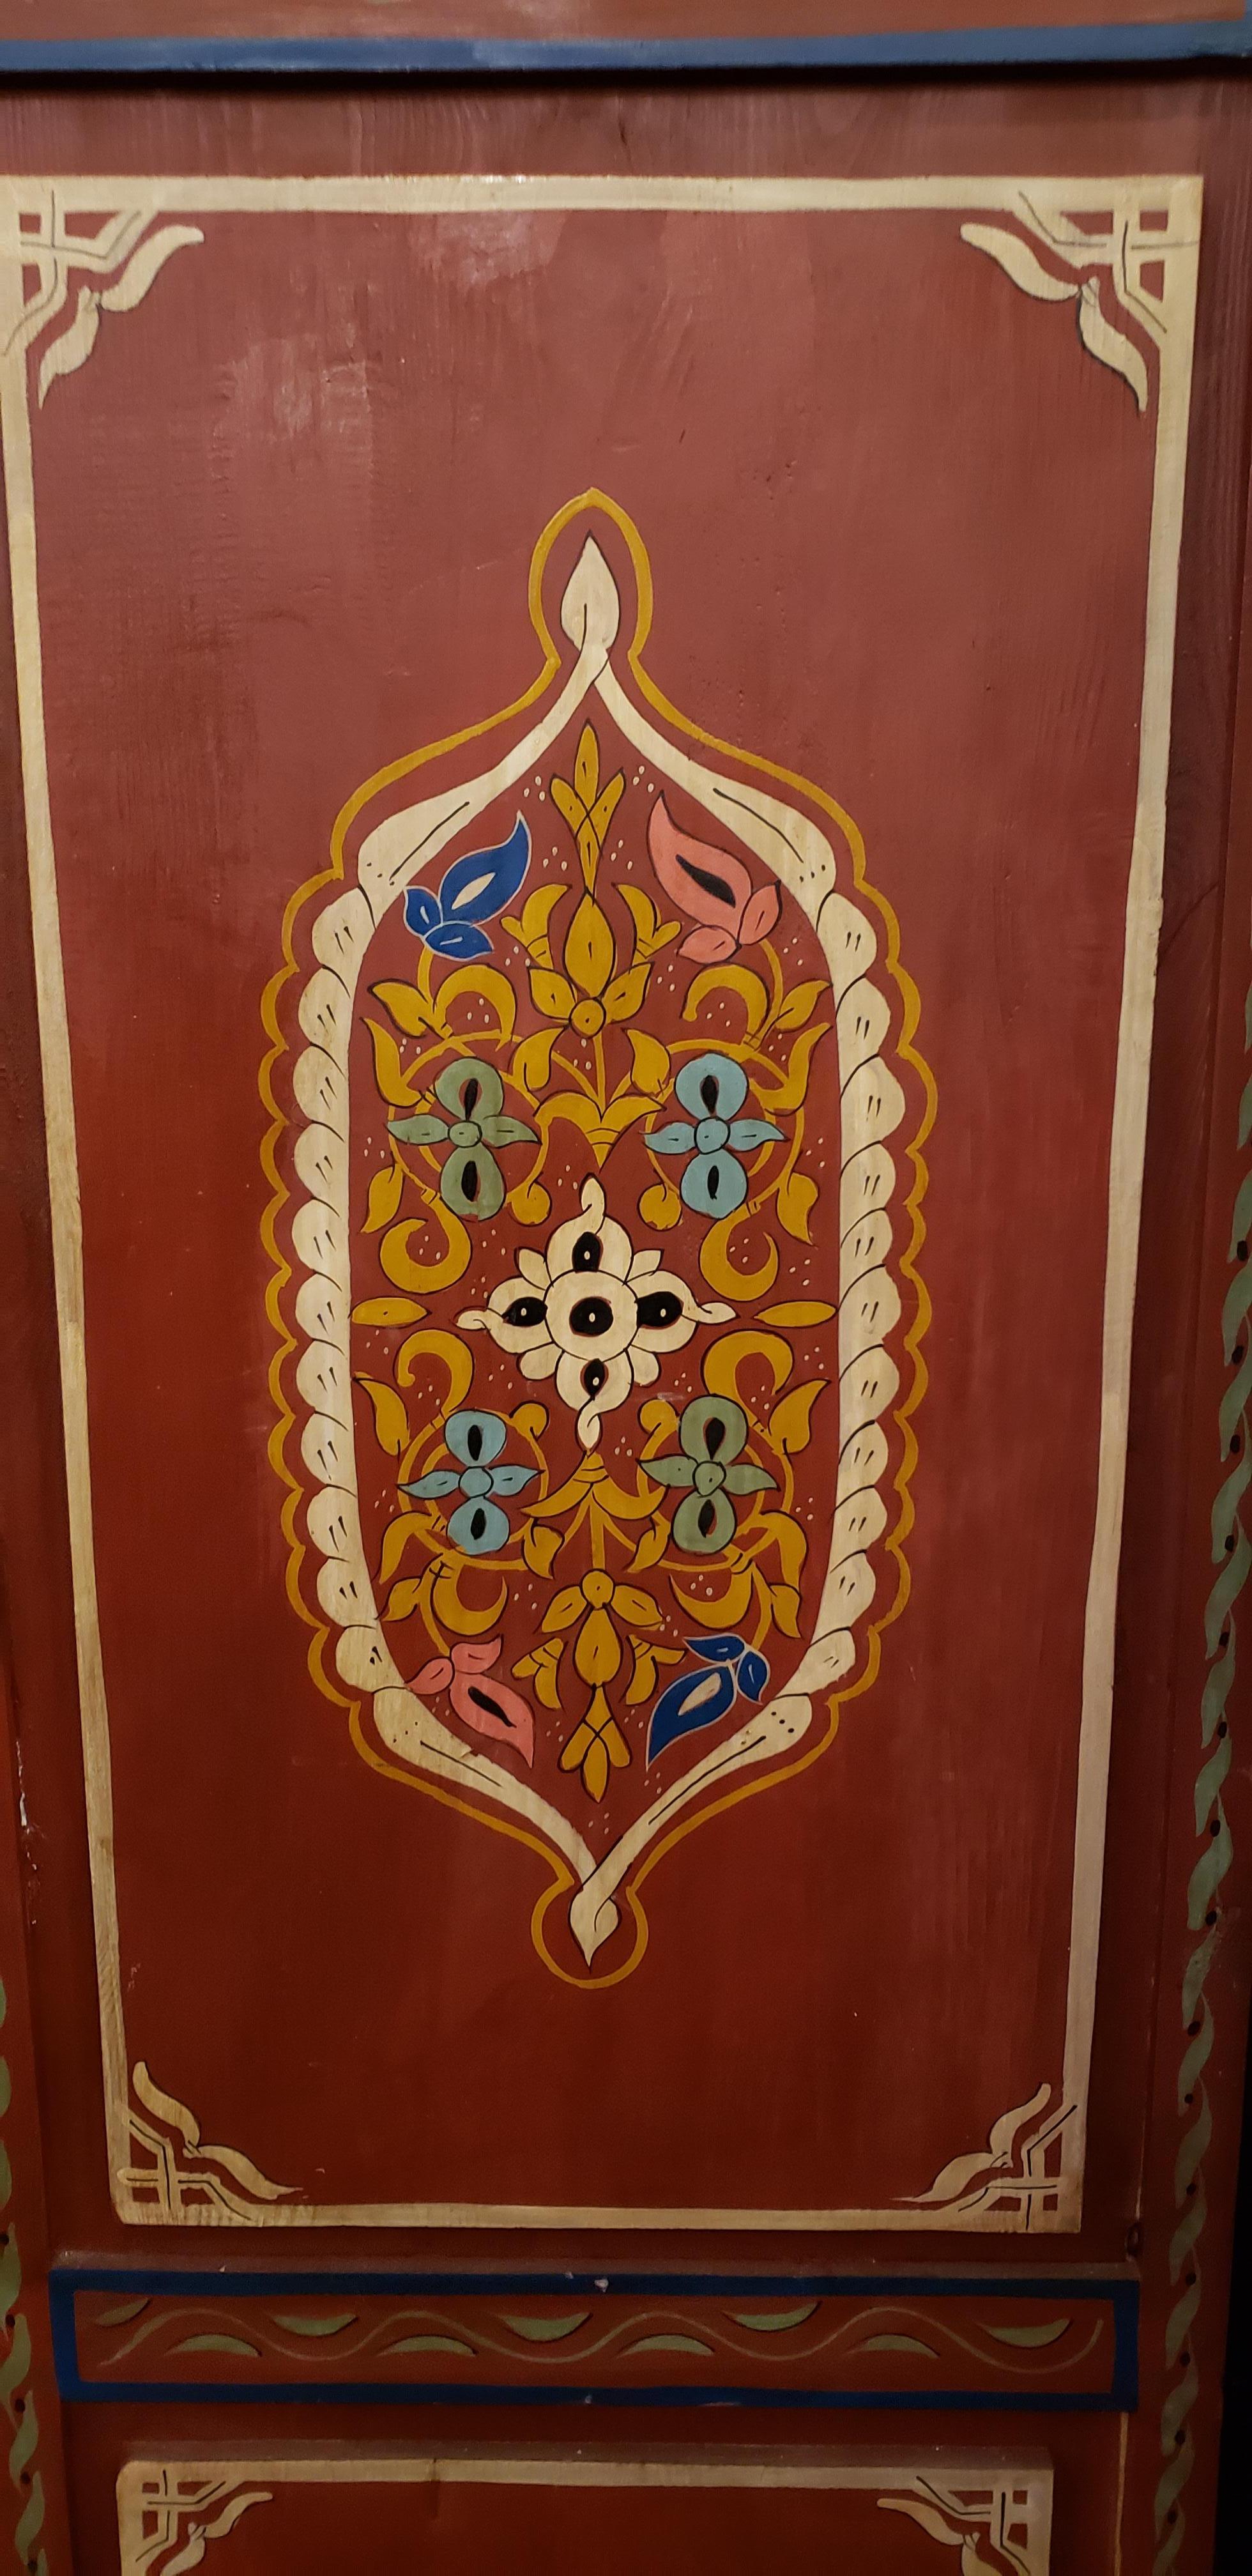 This is a 100% hand painted and hand carved Moroccan wooden armoire made in the city of Marrakech. Great handcraftsmanship throughout, featuring the famous Moroccan Zouak work. Beautiful add-on to your home or office decor. Lots of storage space.